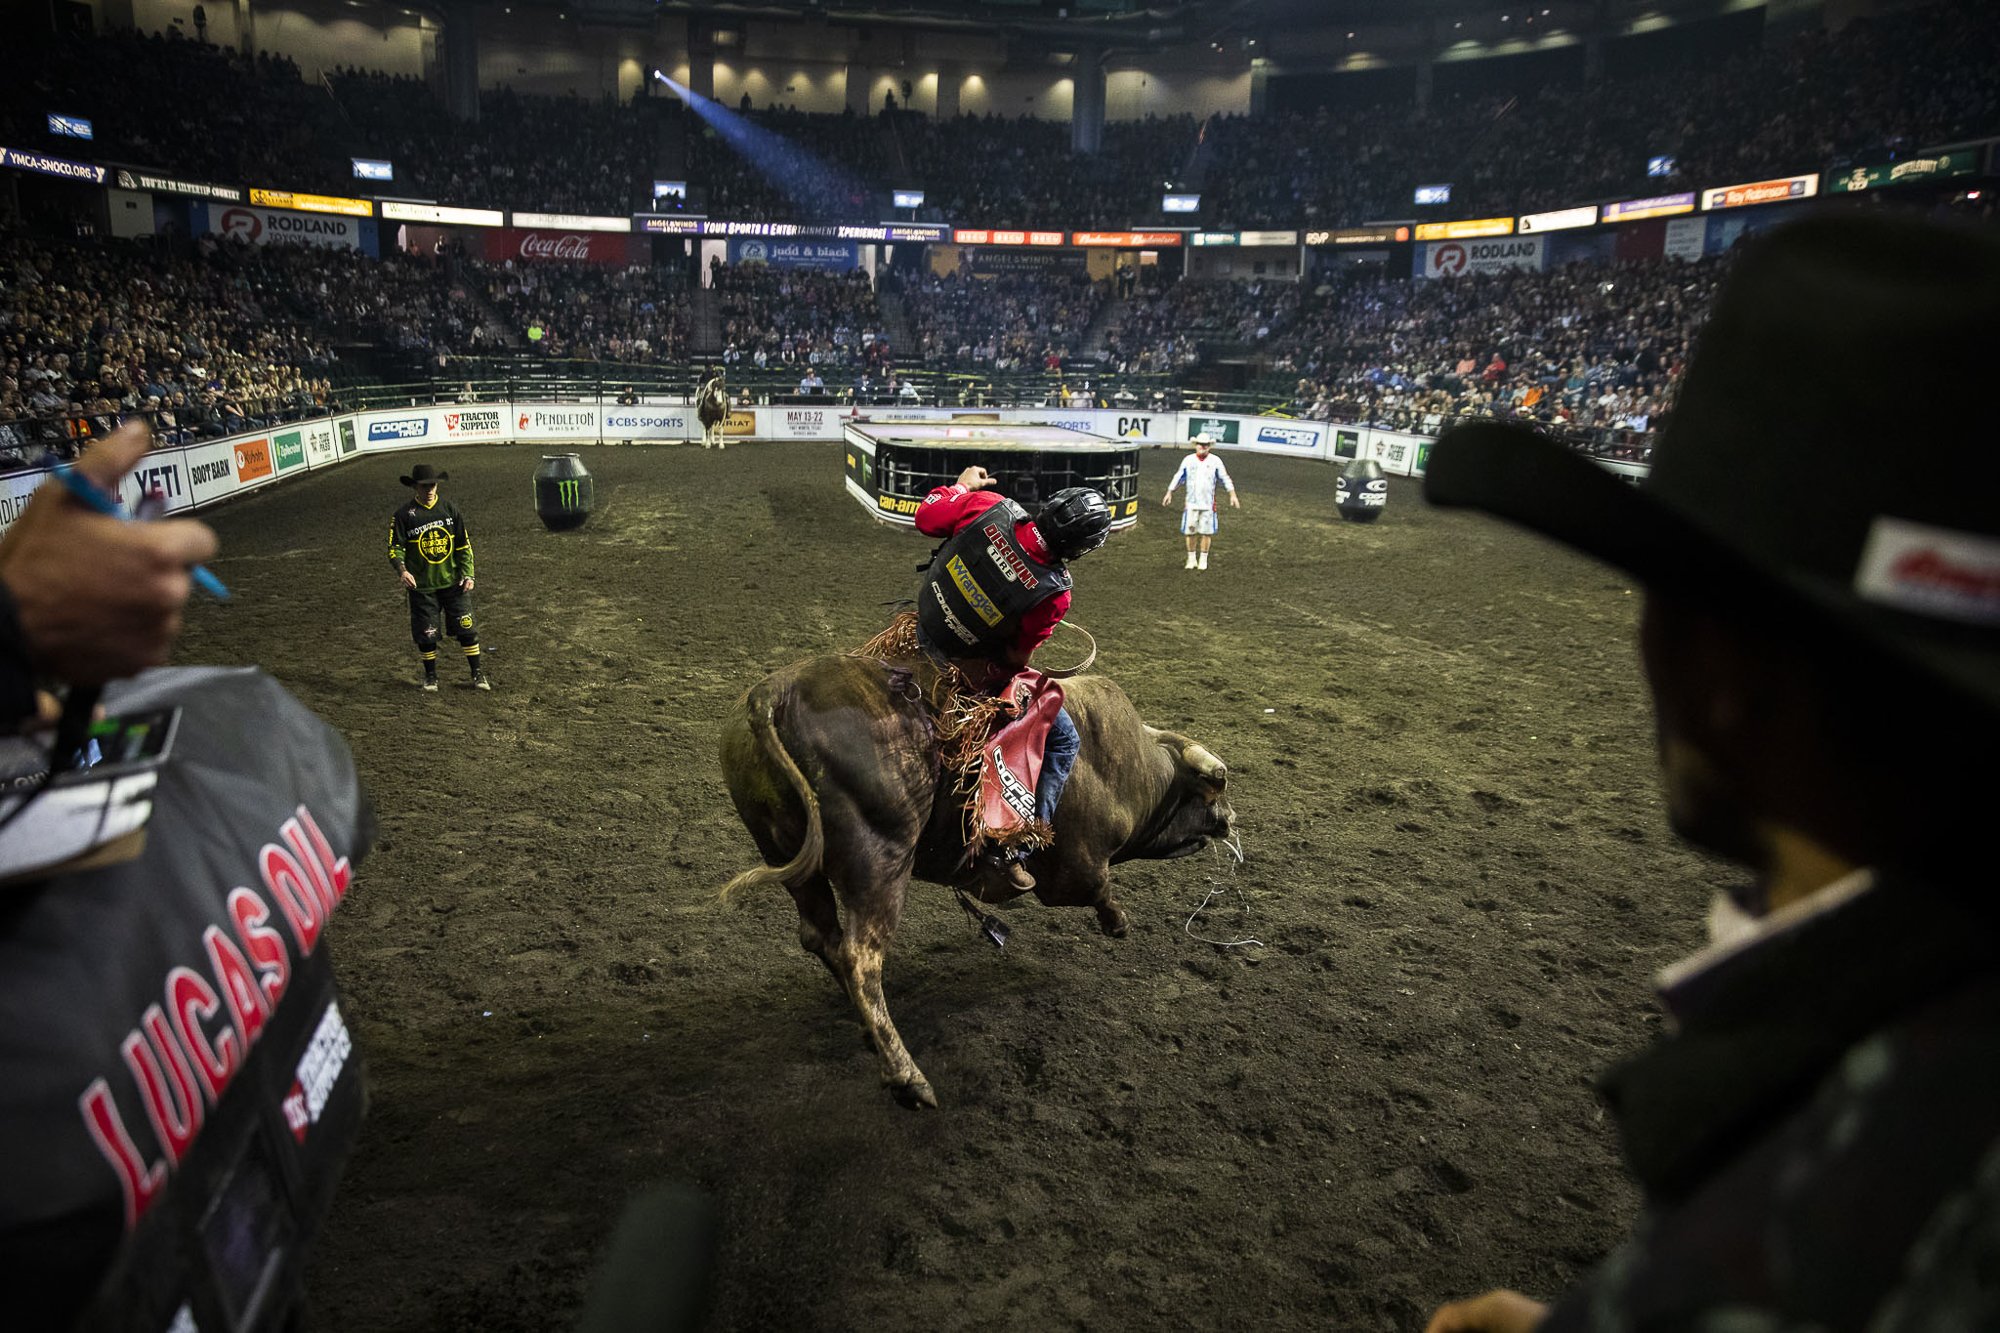  Silvano Alves rides his bull into the arena as the chute opens during the PBR Everett Invitational at Angel of the Winds Arena on April 6, 2022 in Everett, Washington.  